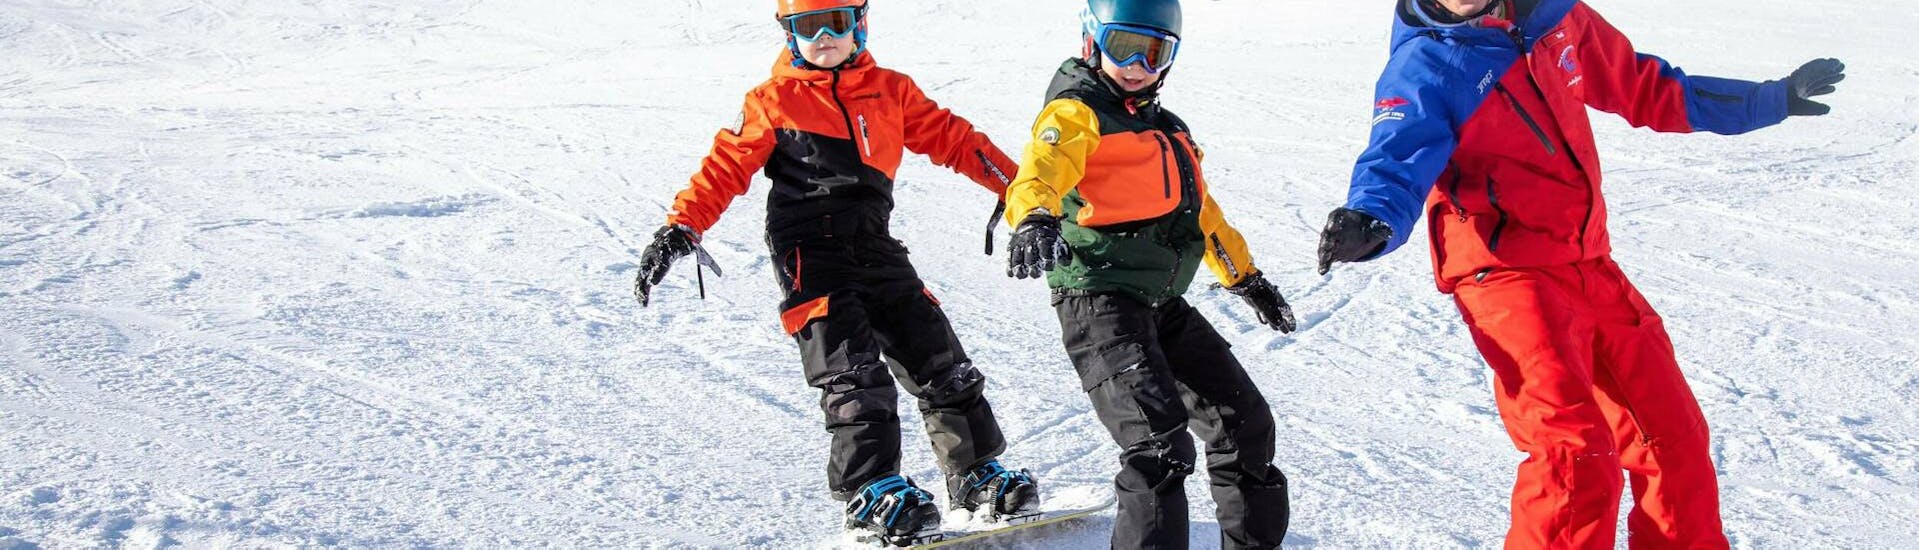 Private Snowboard Lessons for Kids in Galtür for All Ages from Skischule Silvretta Galtür.